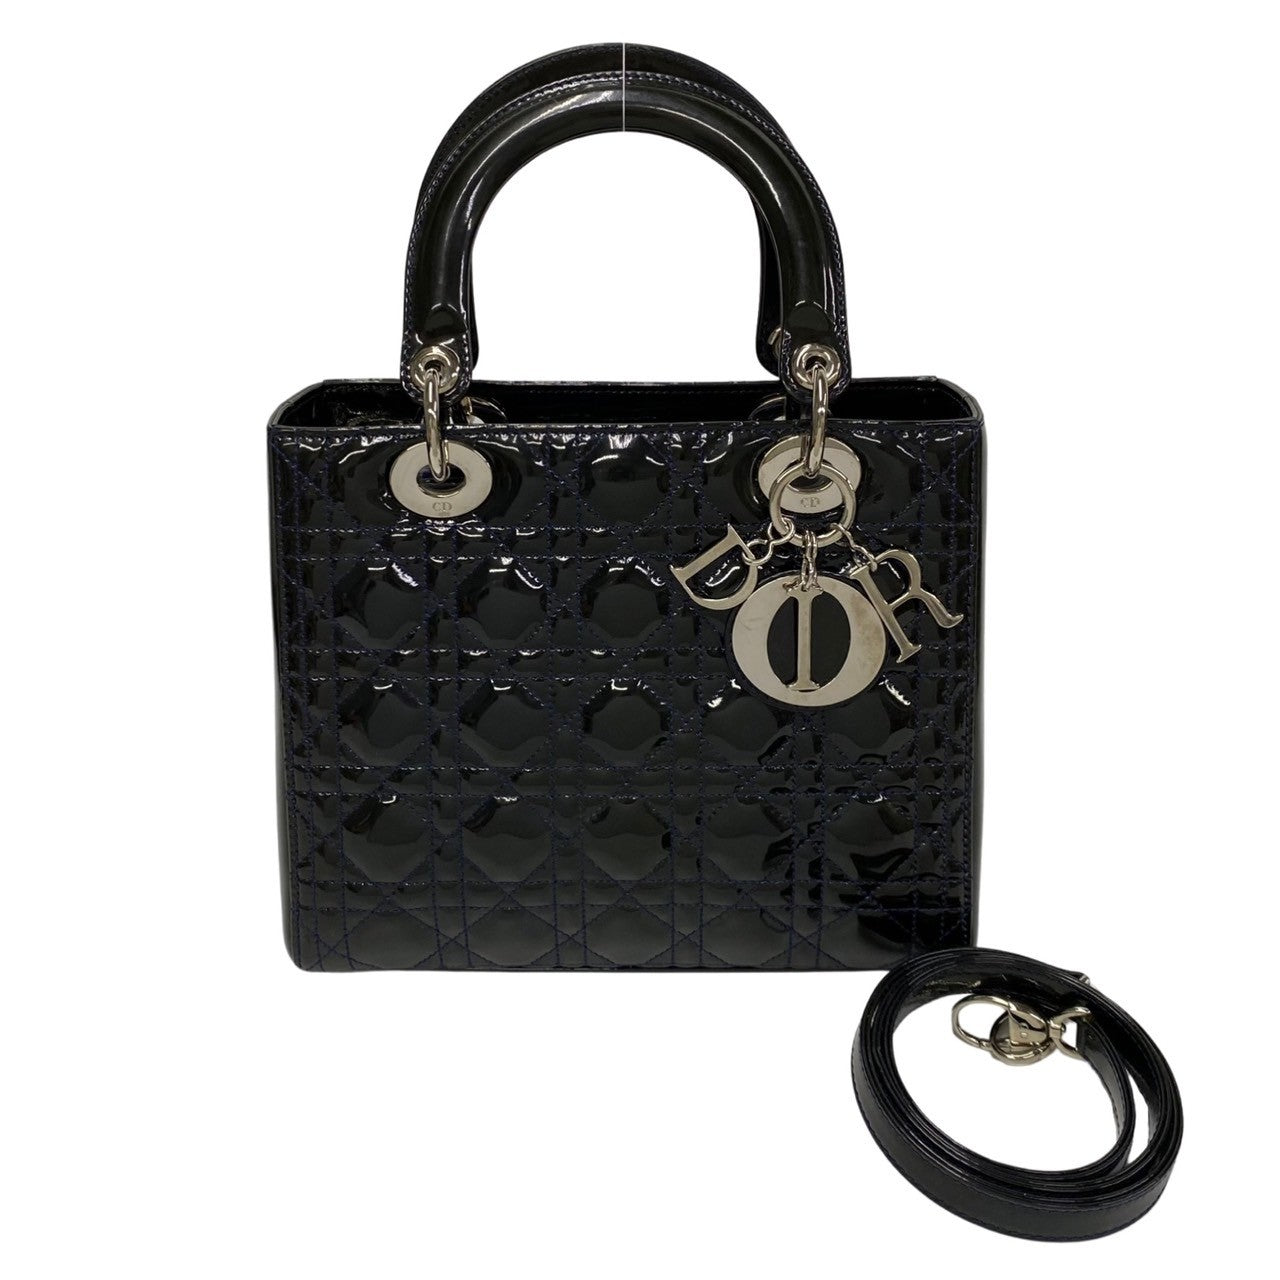 Cannage Patent Leather Lady Dior